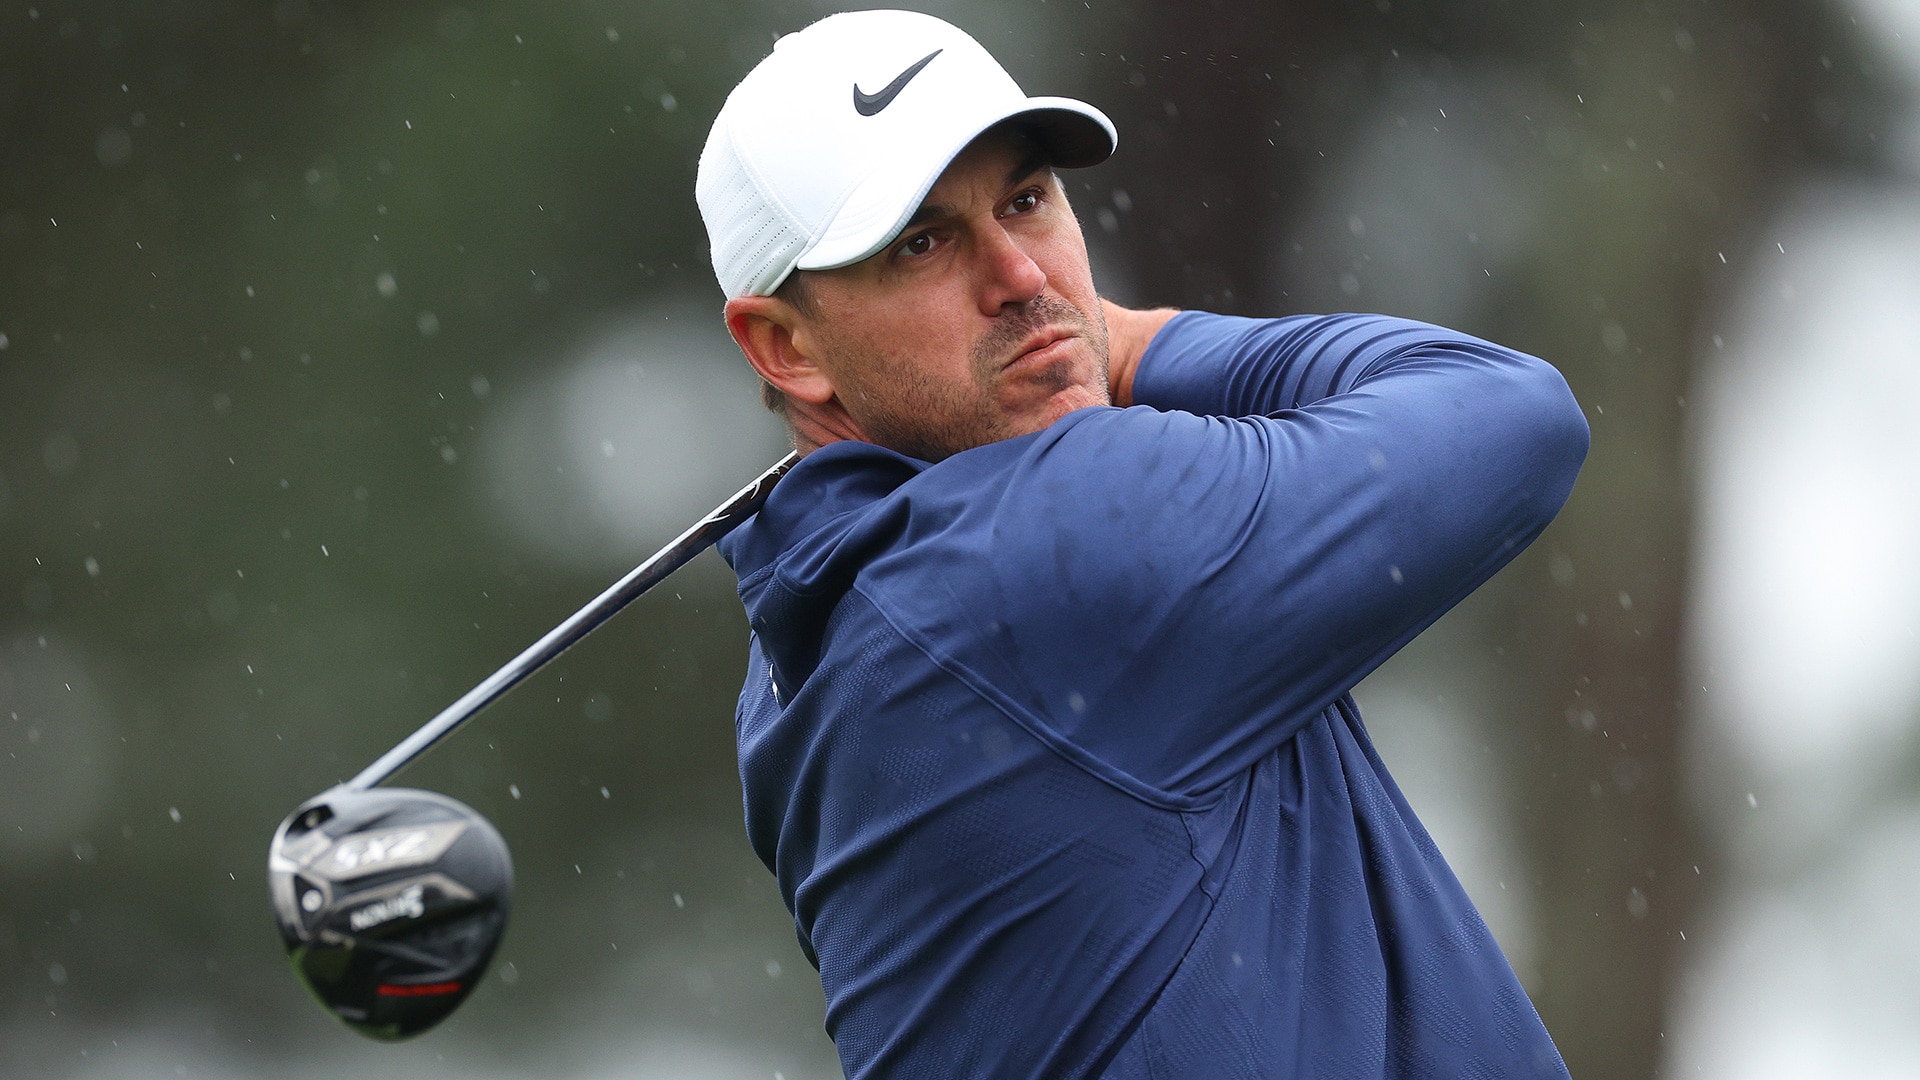 2023 Masters: His swing and swagger back, now Brooks Koepka is back where he’s longed to be